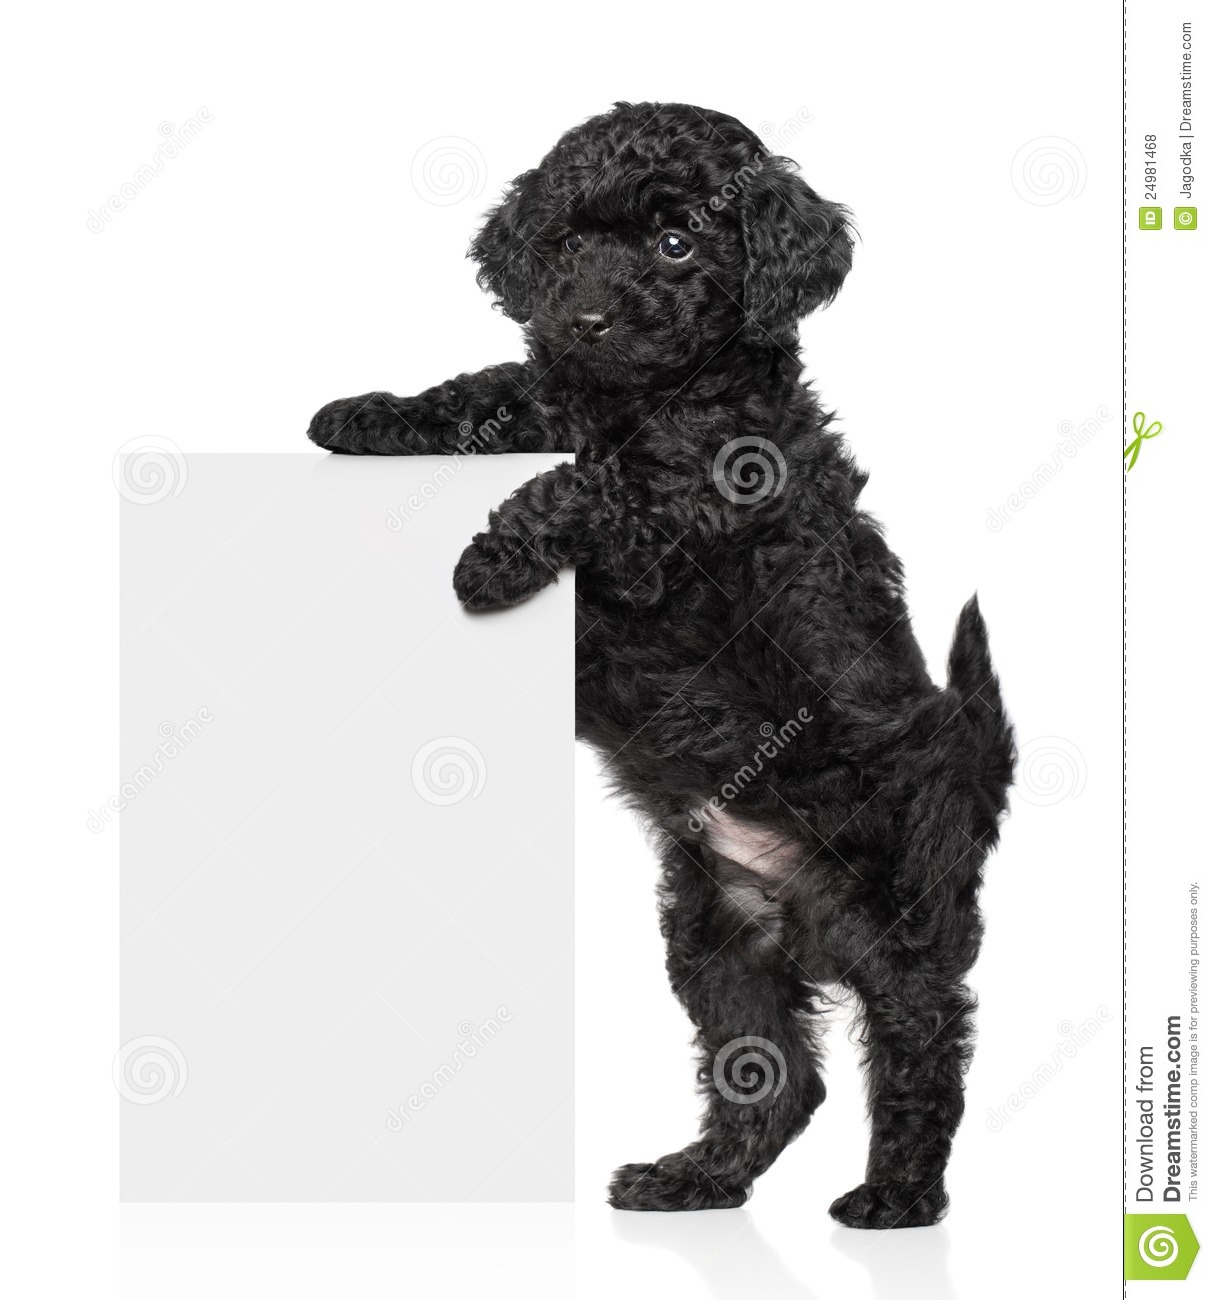 Black Toy Poodle Puppy Hold A Banner Royalty Free Stock Photos   Image